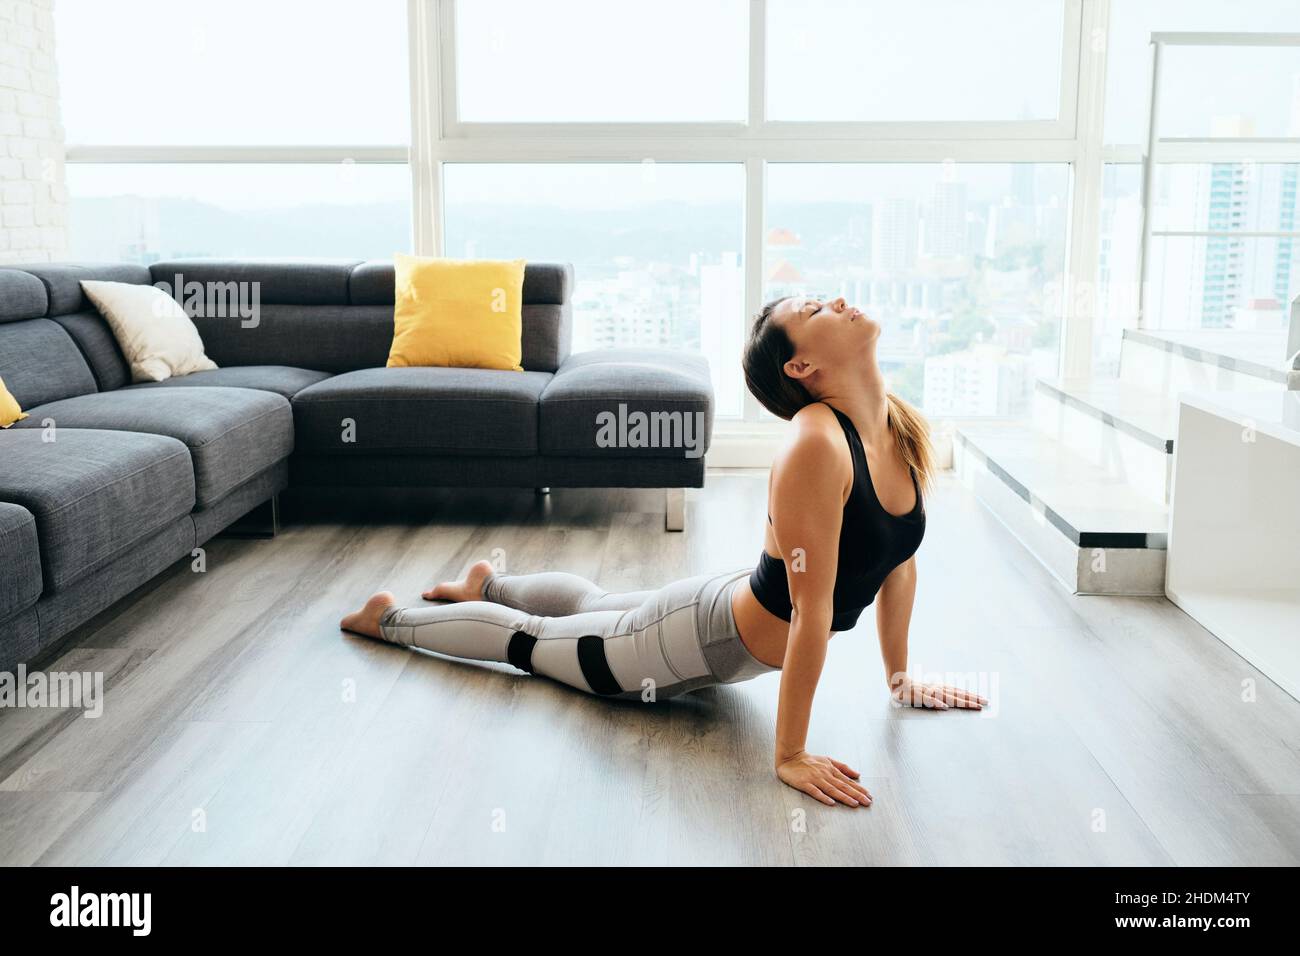 yoga, stretching, piega posteriore, yoga, stretching, backbend, backbends Foto Stock